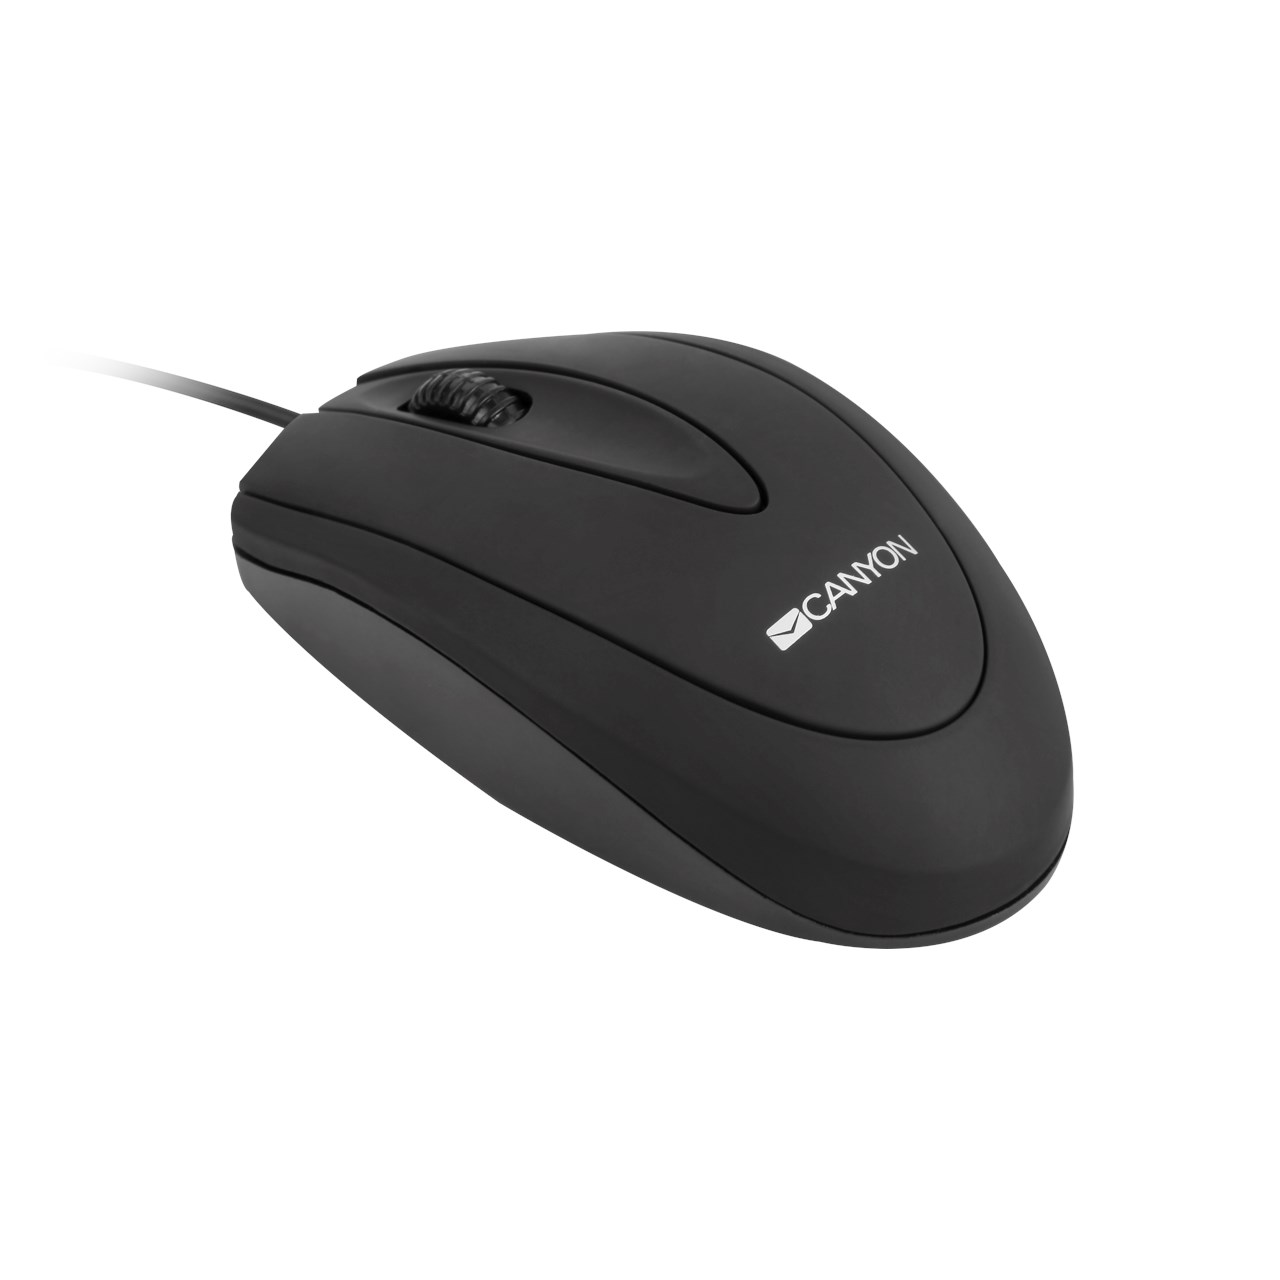 macbeth collection usb optical mouse driver download